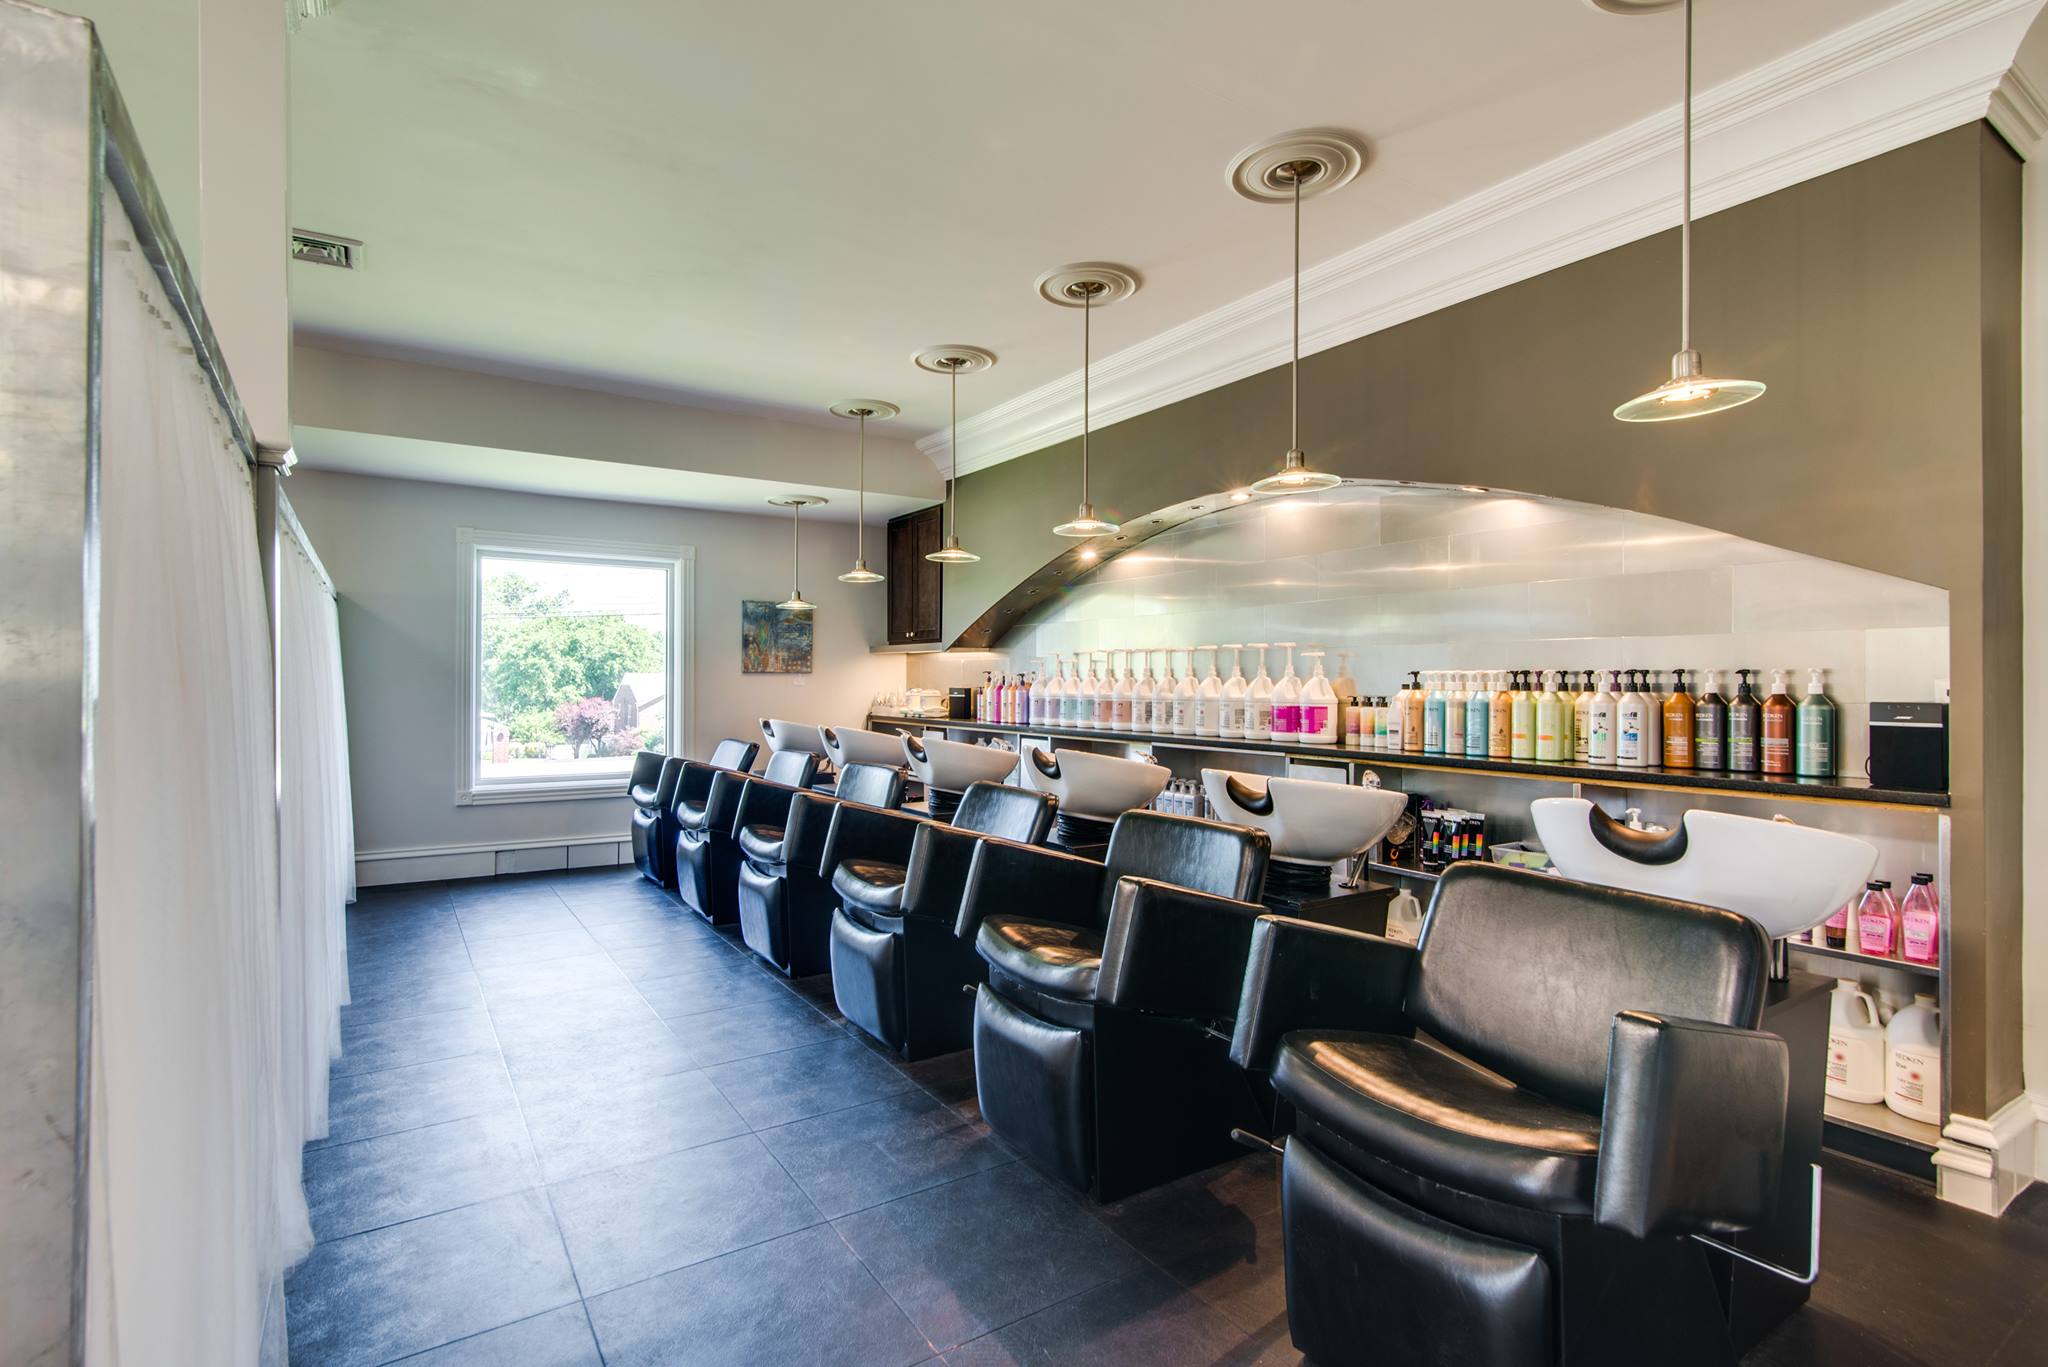 2. "Top Nashville Salons for Blonde Hair Colouring" - wide 6